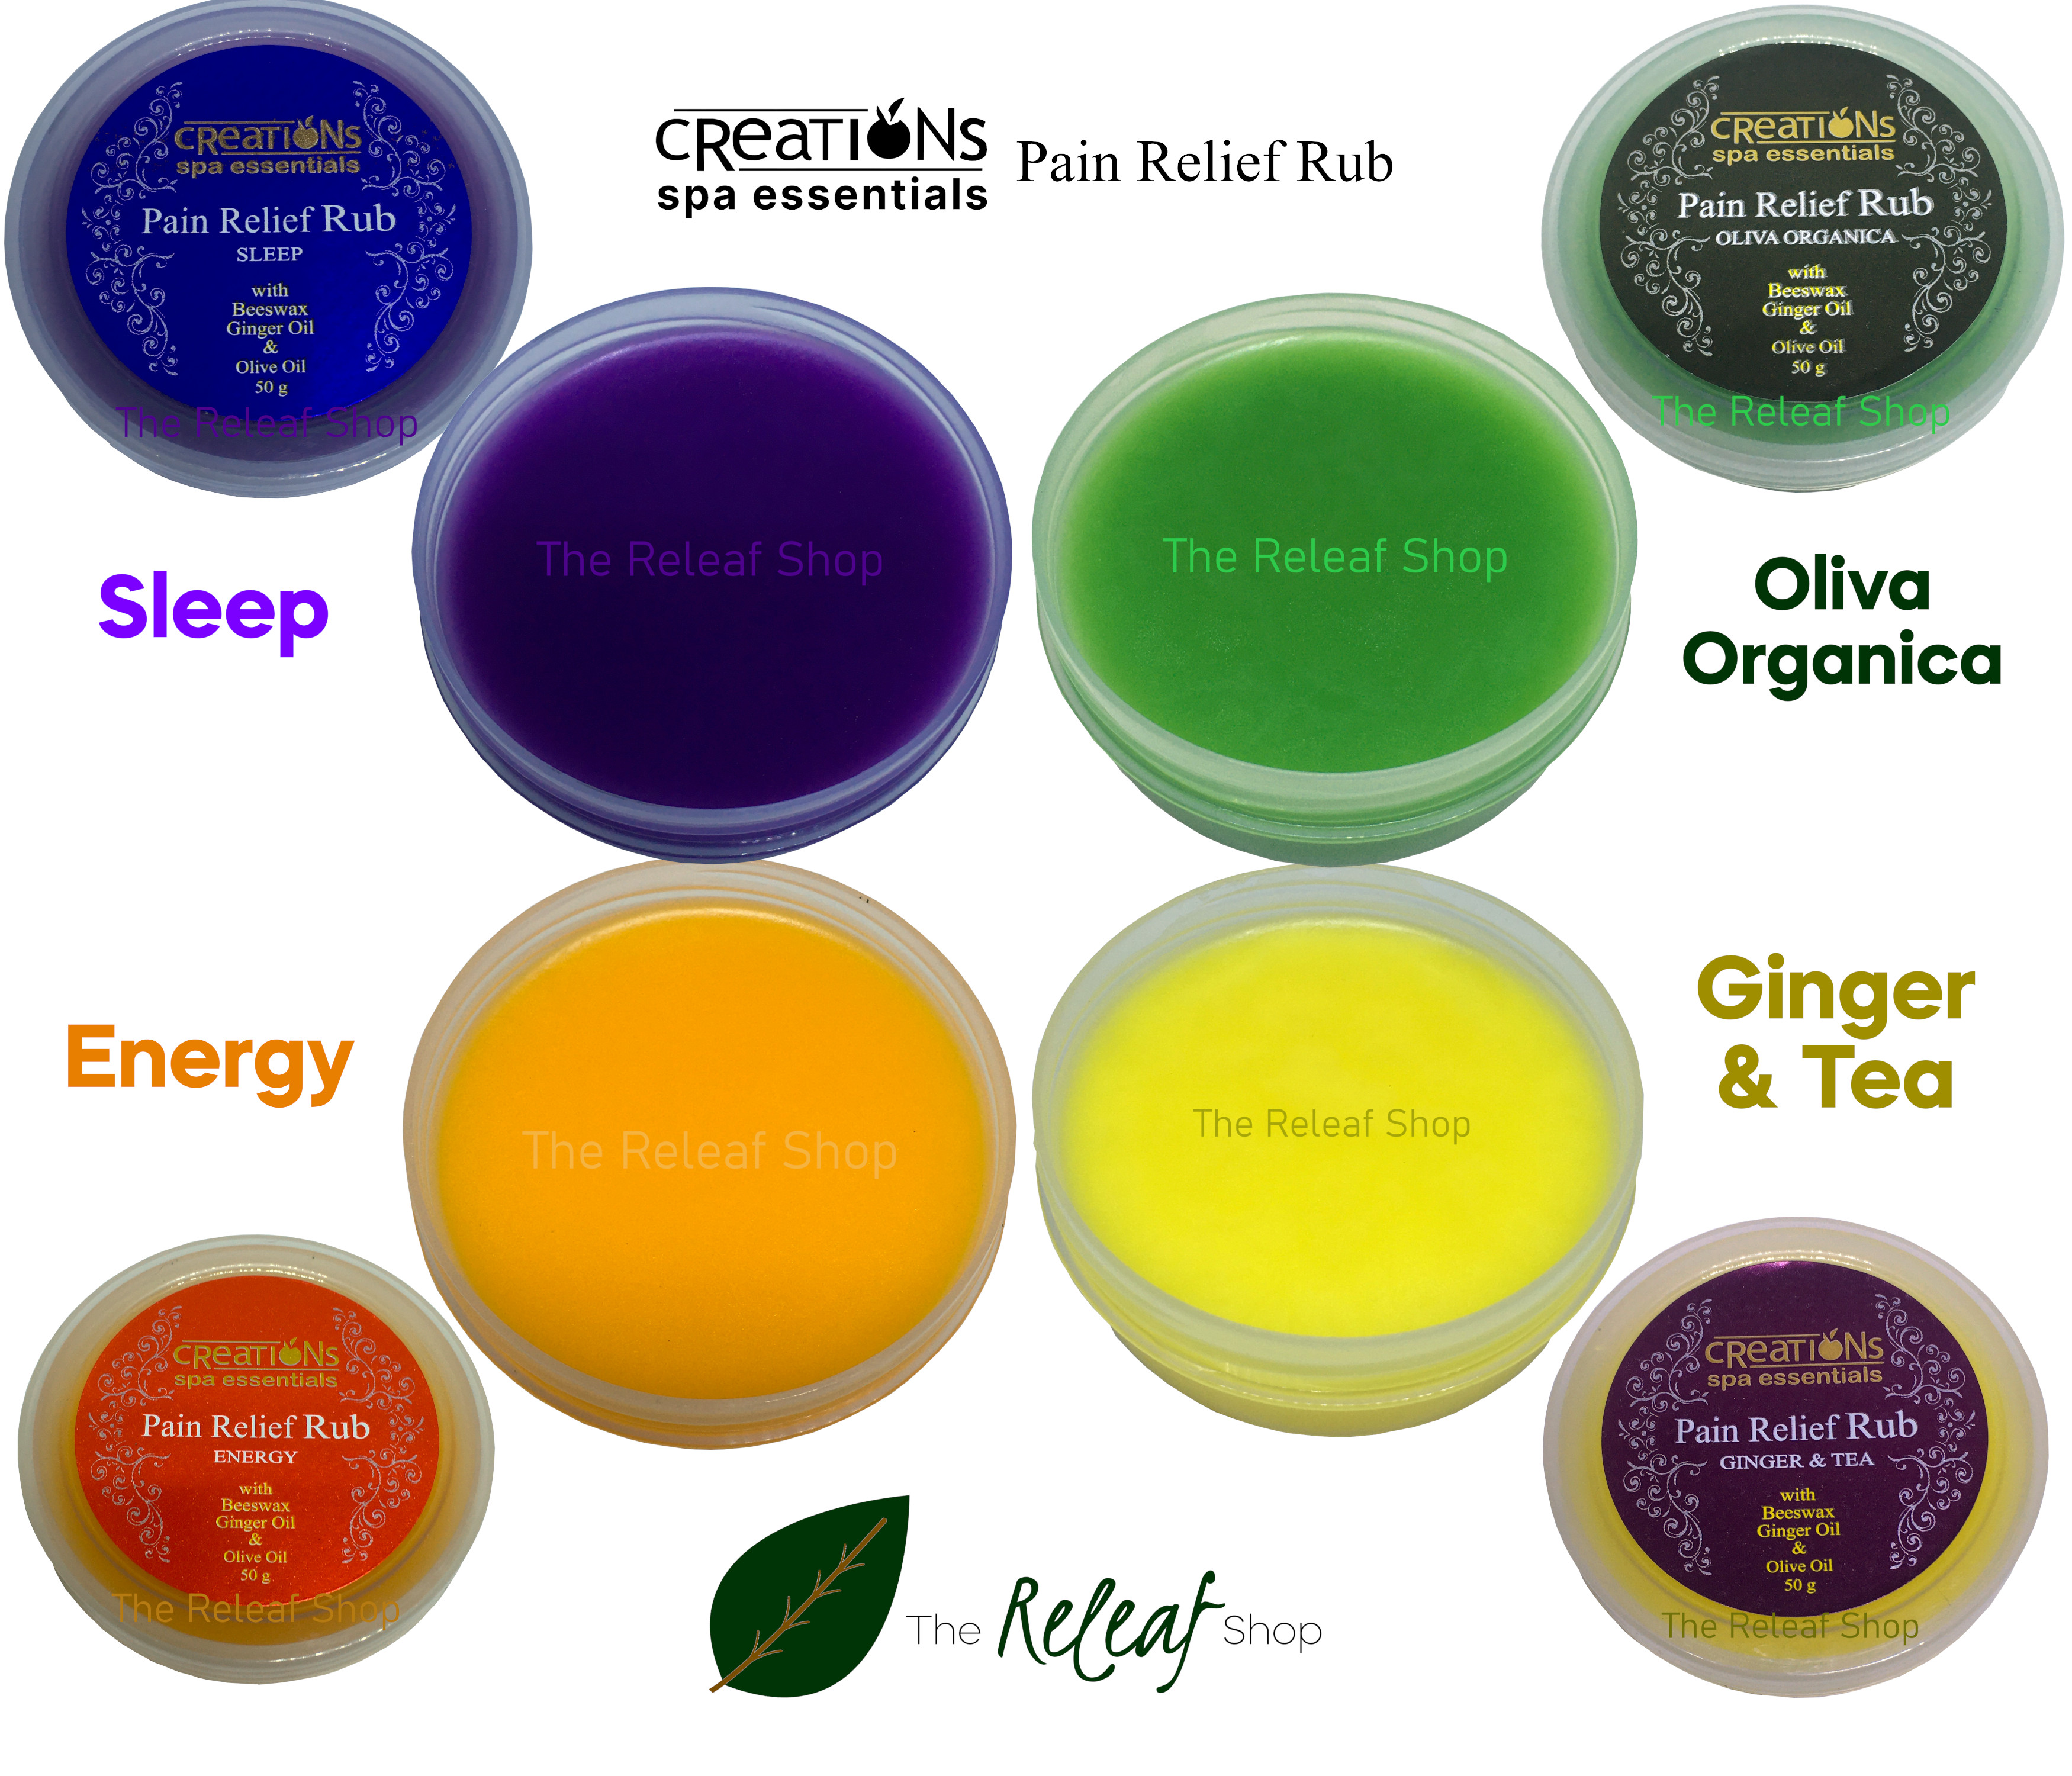 Creations Spa Essentials Pain Relief Rub - Sleep and Ginger & Tea